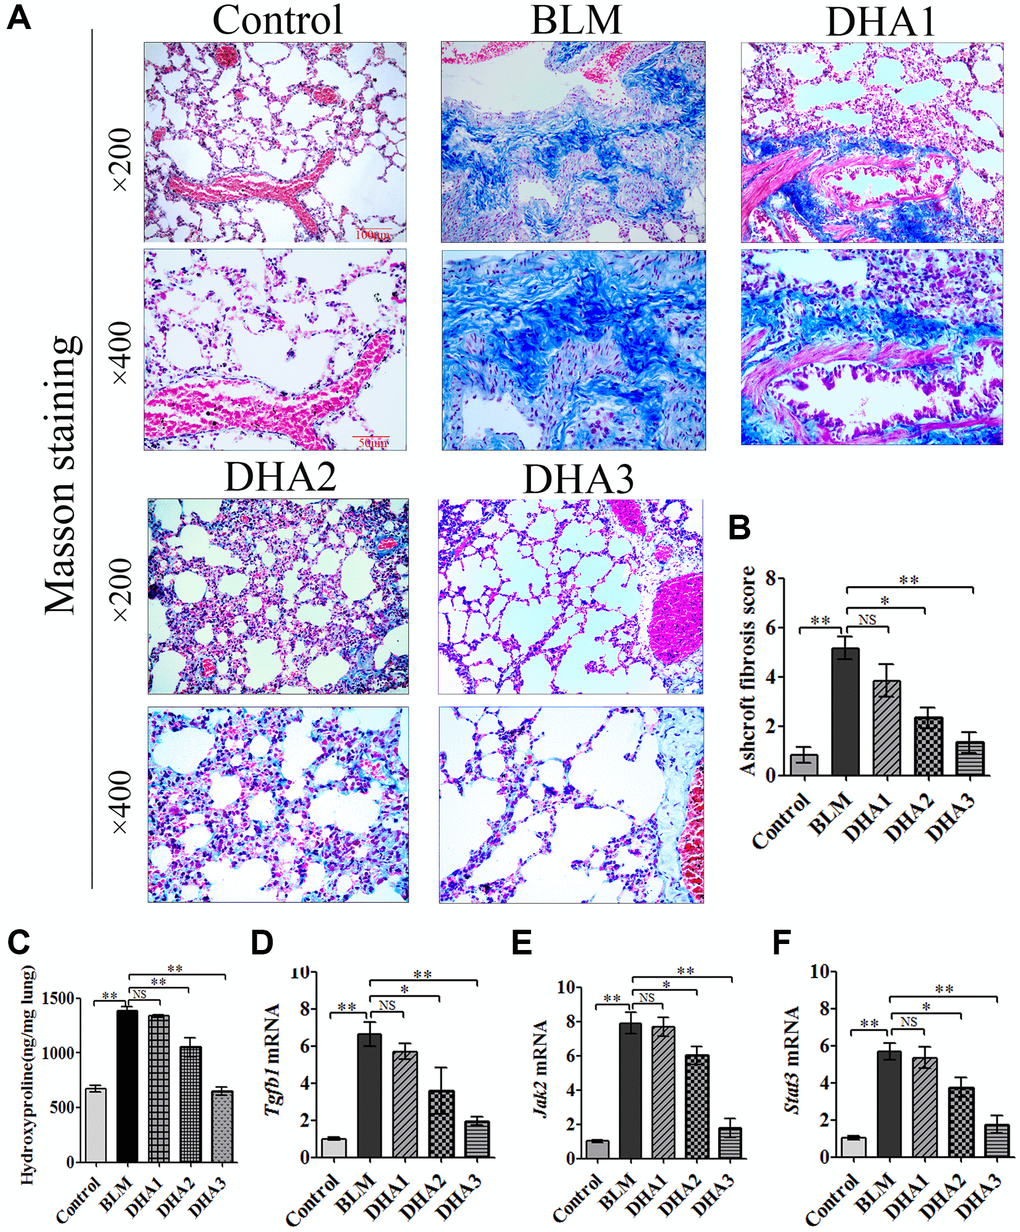 DHA reduced collagen deposition in pulmonary fibrosis tissues and inhibited the expression of Tgfb1, Jak2, and Stat3 mRNA in lung tissues. The rats were sacrificed at 28 days after bleomycin injection, with or without DHA treatment, their lungs were removed and blood collected. (A) Representative images of Masson staining of bleomycin-treated rat lungs, with and without DHA treatment. (B) Evaluation of pulmonary fibrosis using the Ashcroft score (n = 6). (C) Determination of hydroxyproline in lung tissue (n = 6). (D) Tgfb1, (E) Jak2, and (F) Stat3 mRNA levels in lung tissues were determined using qRT-PCR (n = 6), data are expressed as fold change in mRNA expression normalized to Gapdh expression, with respect to the control group. *P **P 